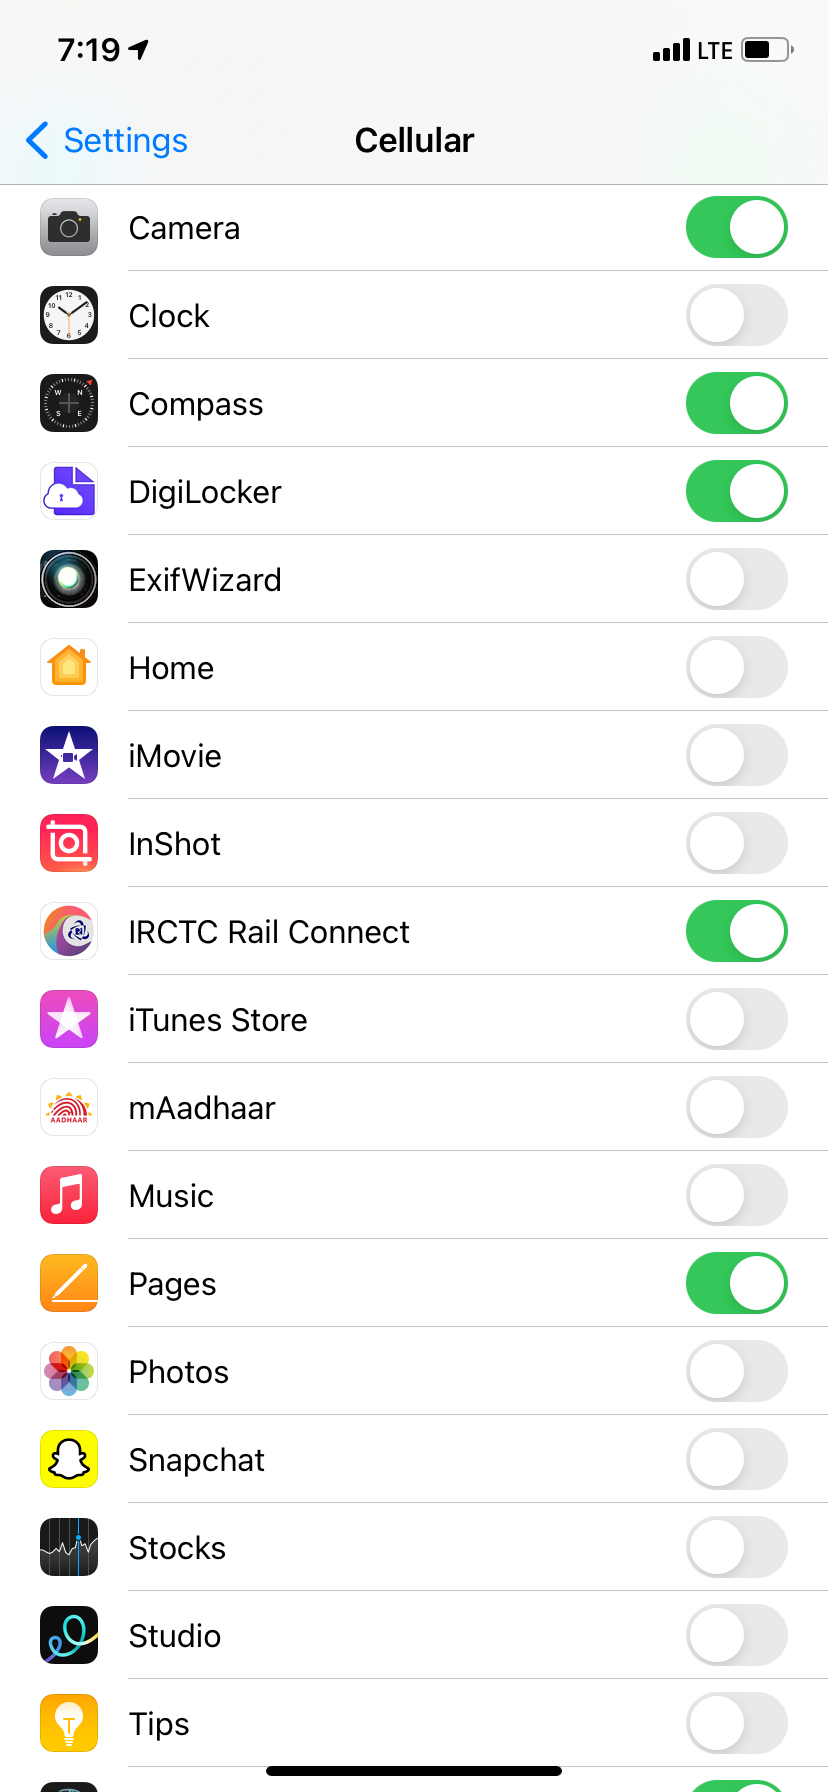 Turn Off Mobile Data for Unnecessary Apps in iPhone Cellular Settings